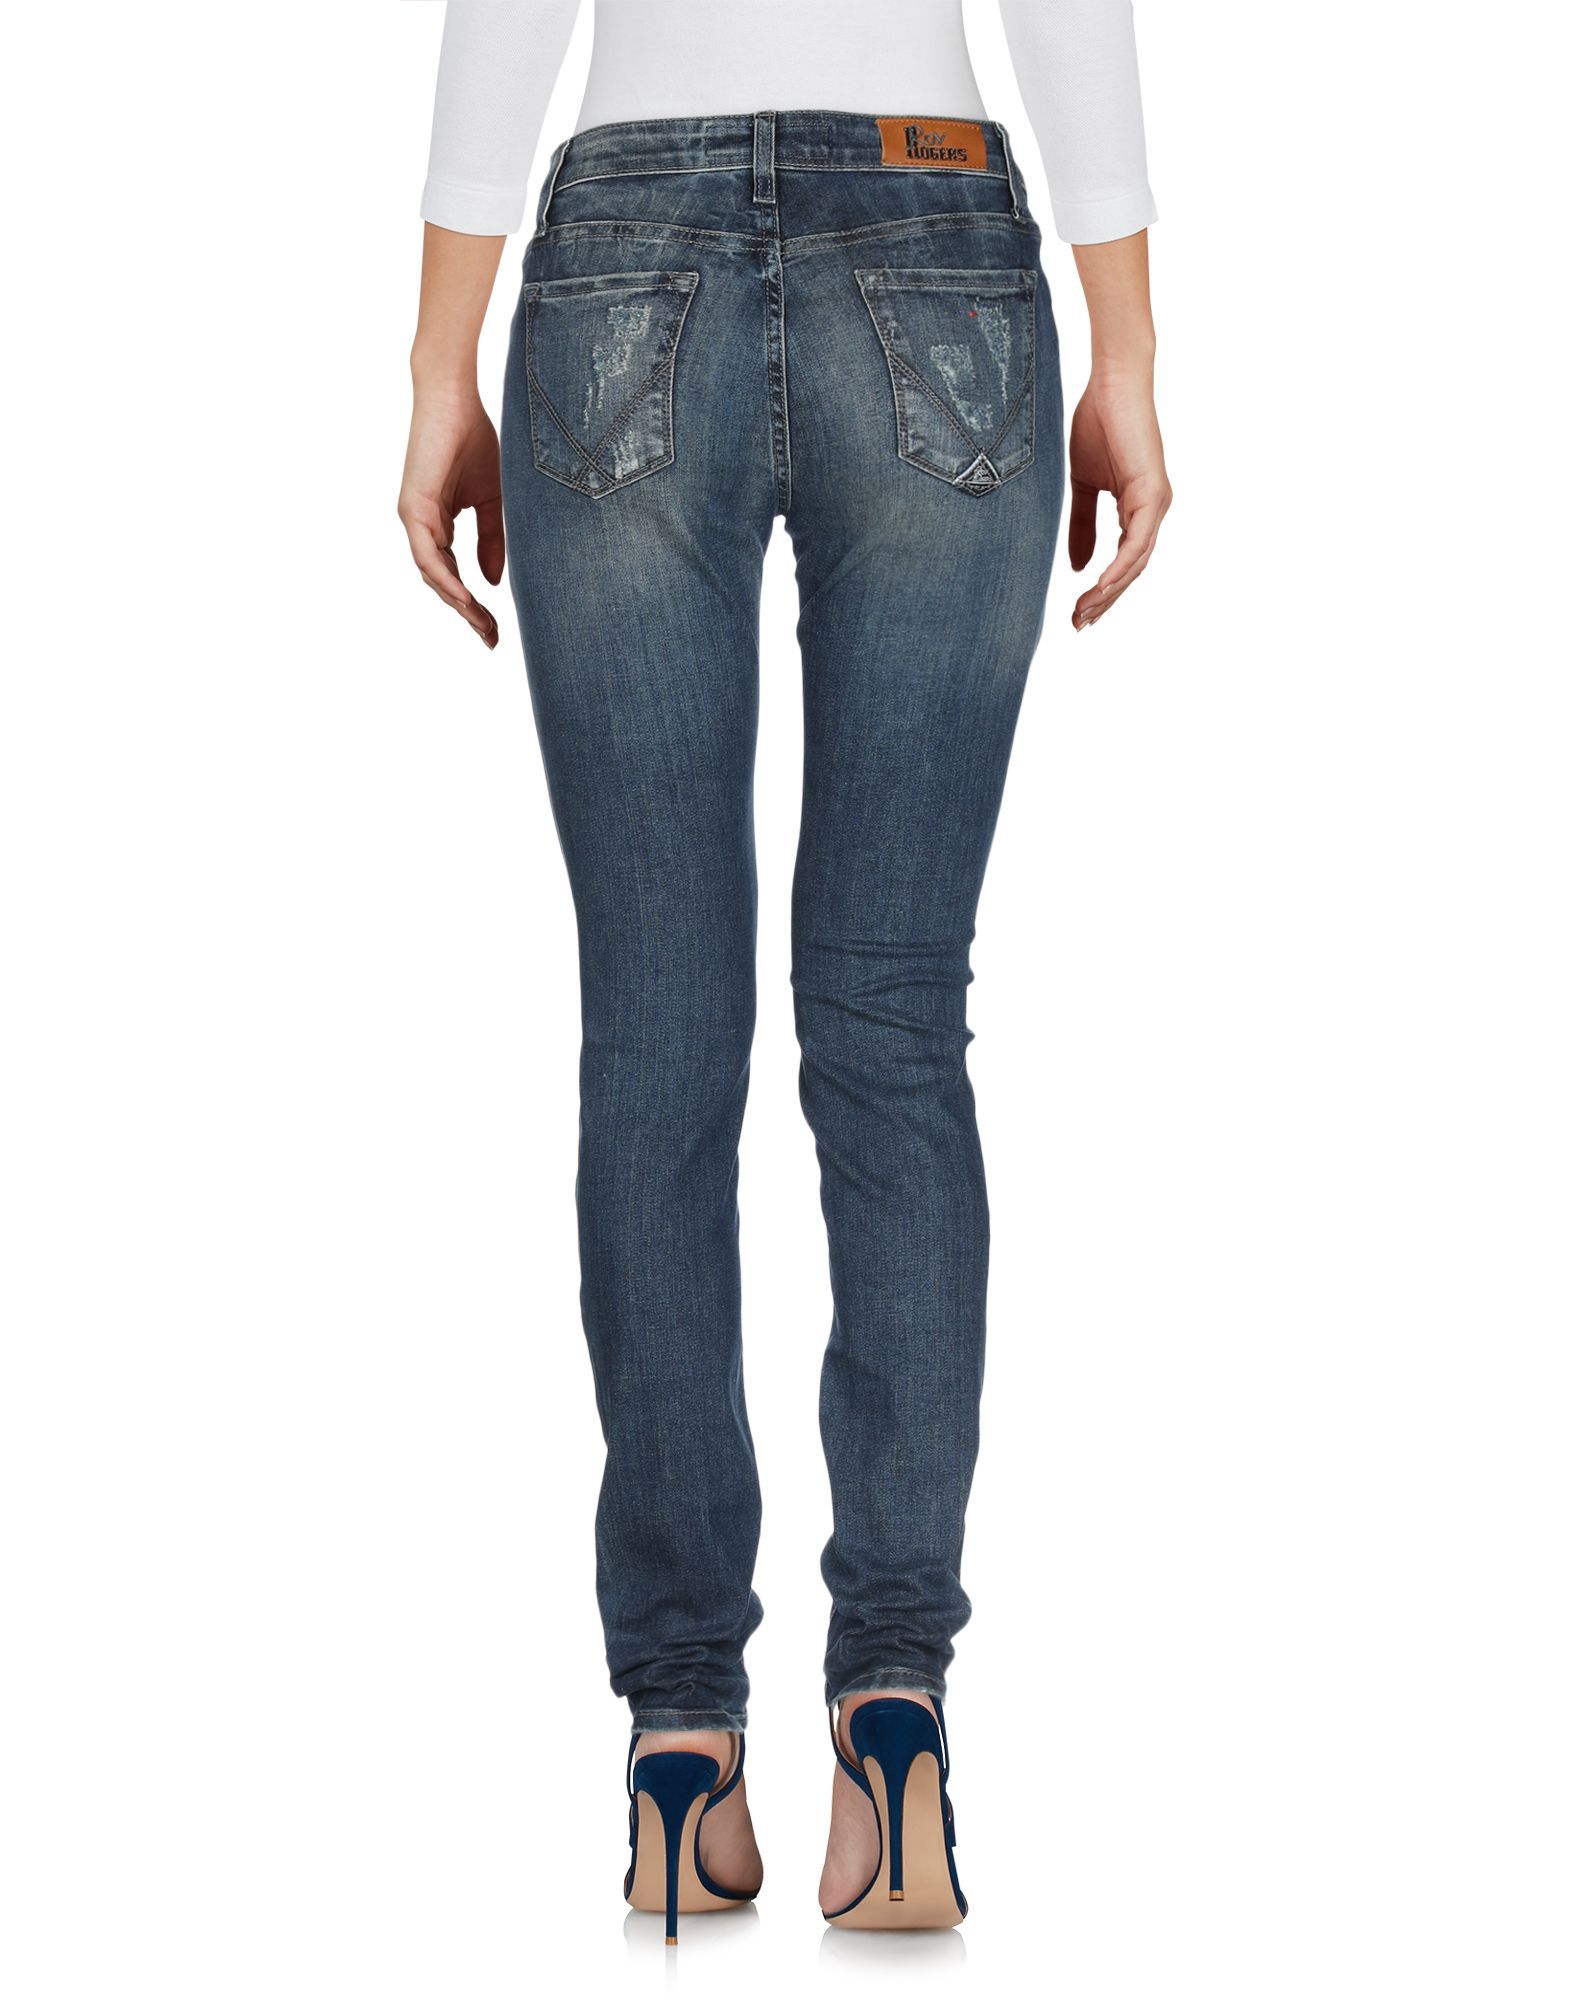 denim, worn effect, faded, rhinestones, logo, solid colour, medium wash, mid rise, front closure, button, zip, multipockets, contains non-textile parts of animal origin, stretch, slim fit